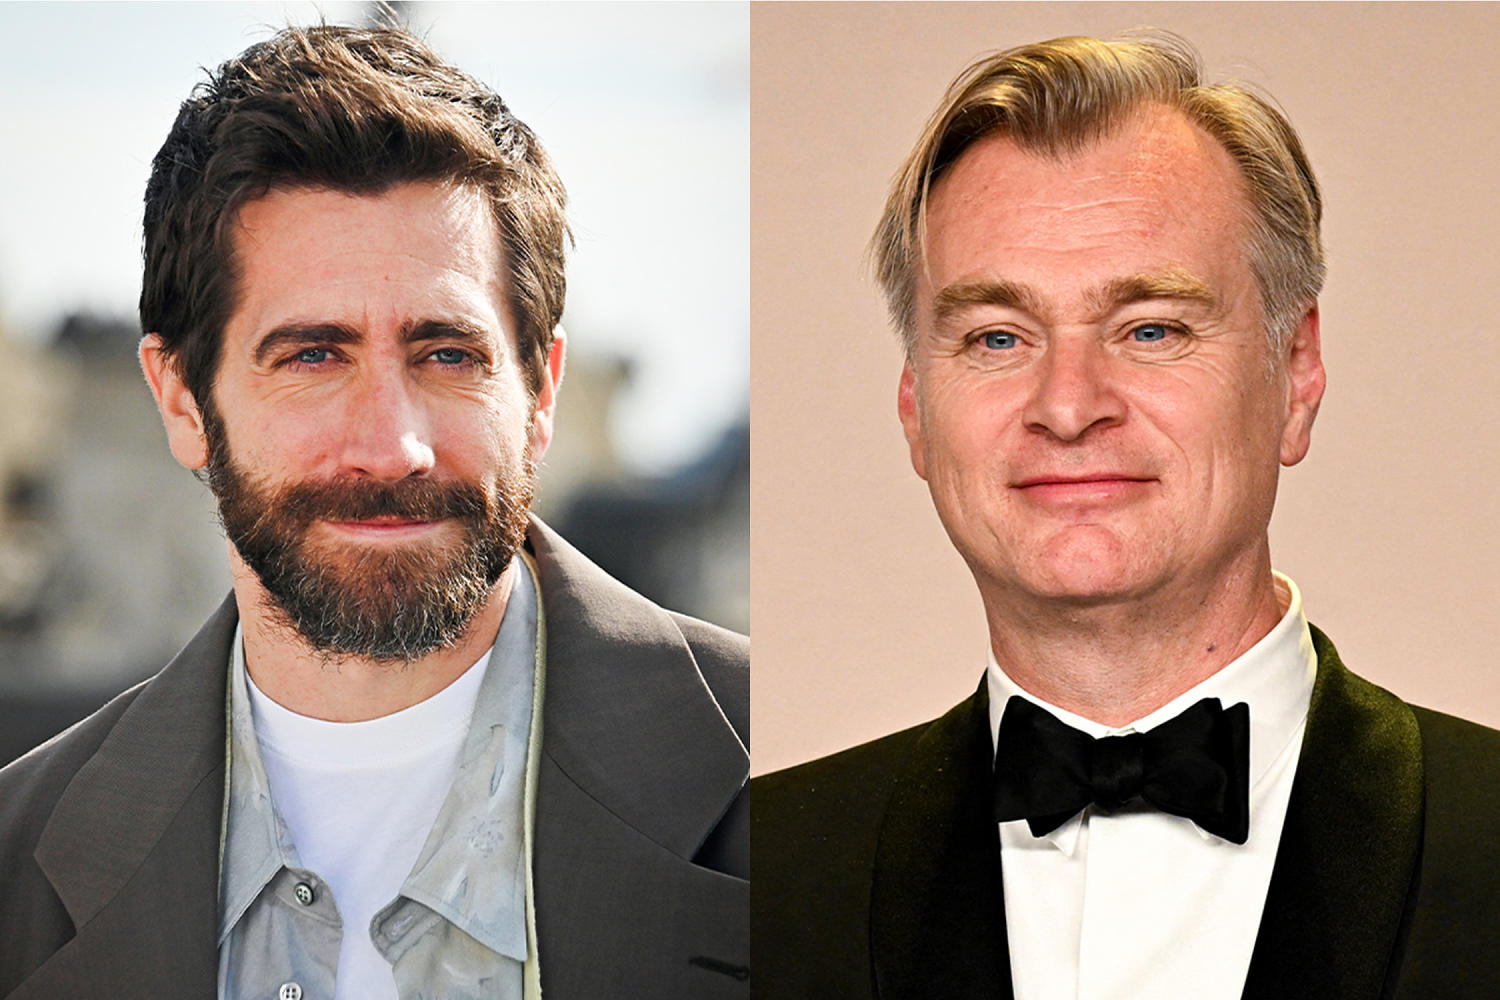 Jake Gyllenhaal says Christopher Nolan personally telling him he lost Batman role was 'pretty cool'